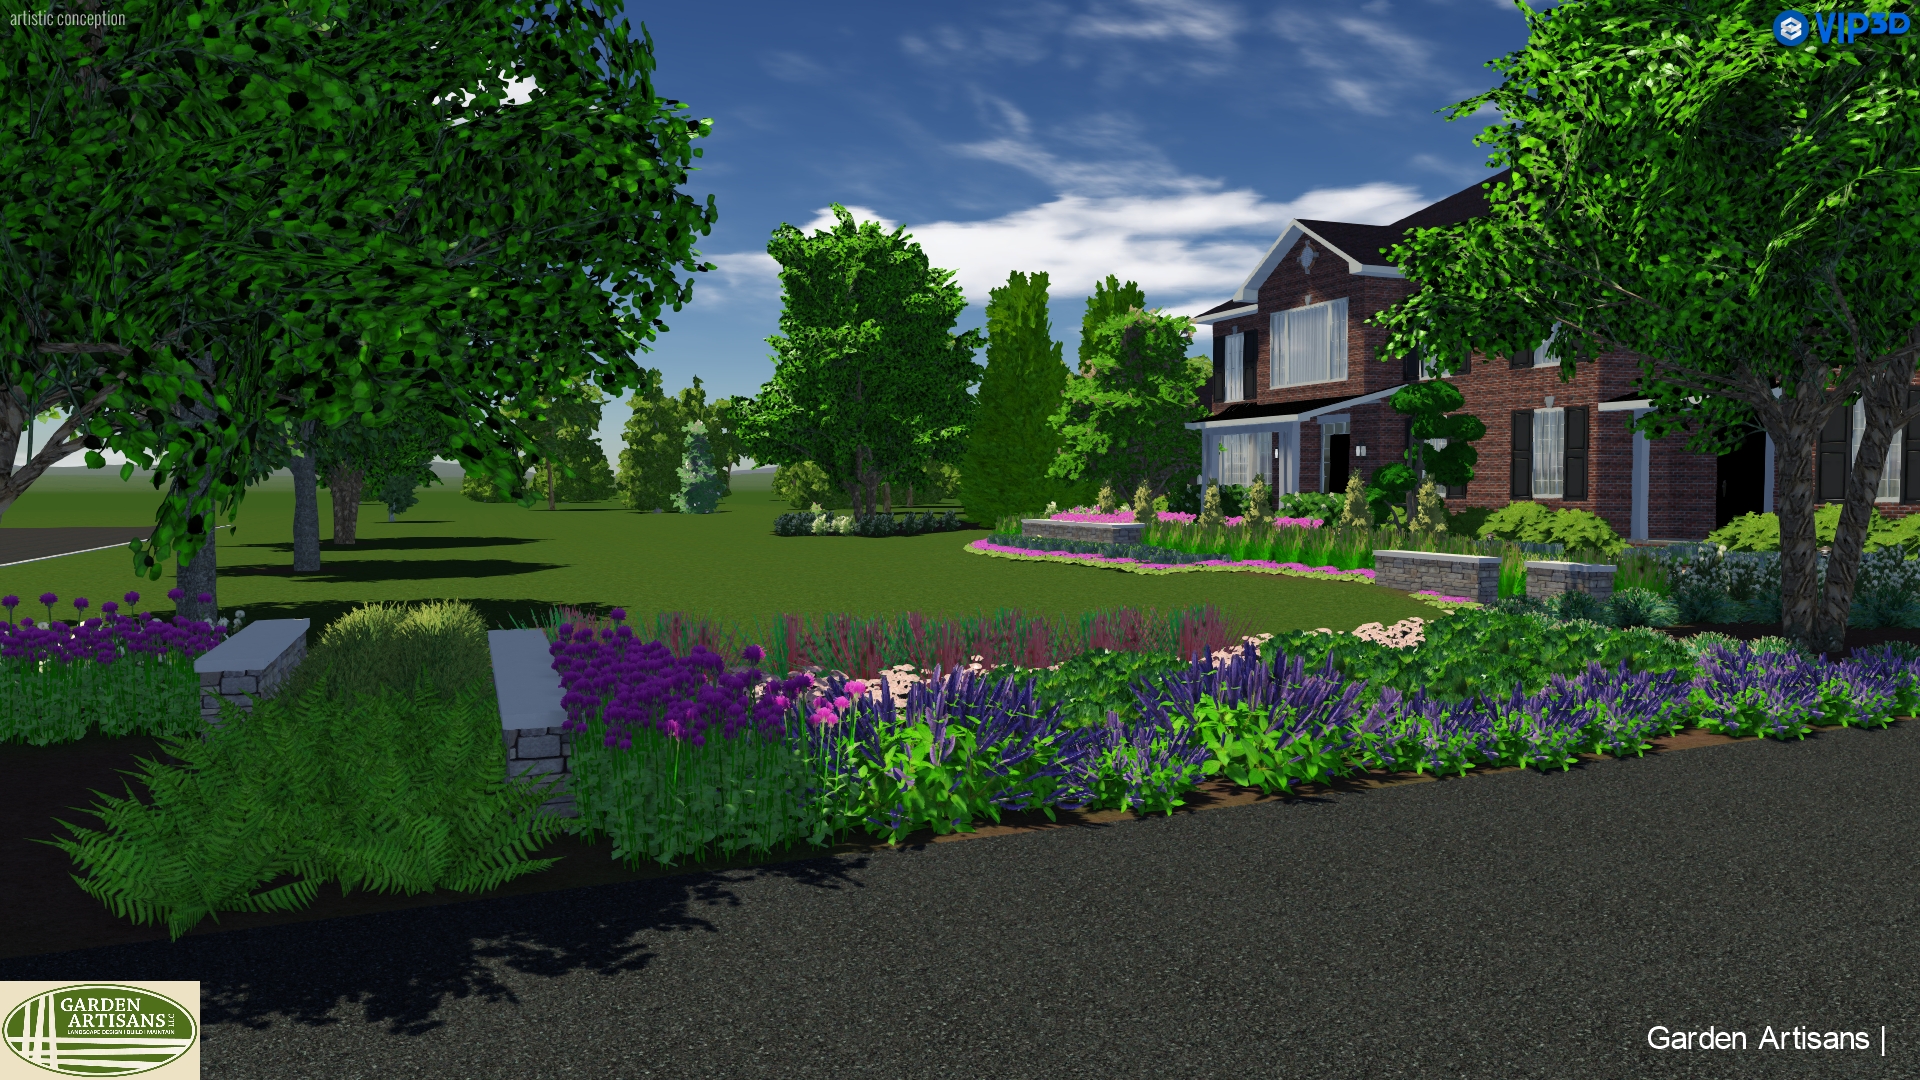 A 3D color rendered planting design model that we developed in the fall. We broke ground last week on the first phase of this front planting design! Our design build teams have been laying out the planting beds, drainage, and front entry wall. I am working on purchasing the specimen trees! Visit our new website to learn more! gardenartisansllc.com 609-371-0099  3d  color  rendering  plantingdesign  model  groundbreaking  planting  design  designbuild  designprocess  team  plantingbeds  drainage  frontentry  wall  specimentrees  trees  newwebsite  thinkitfirst  landscapedesign  landscapearchitecture